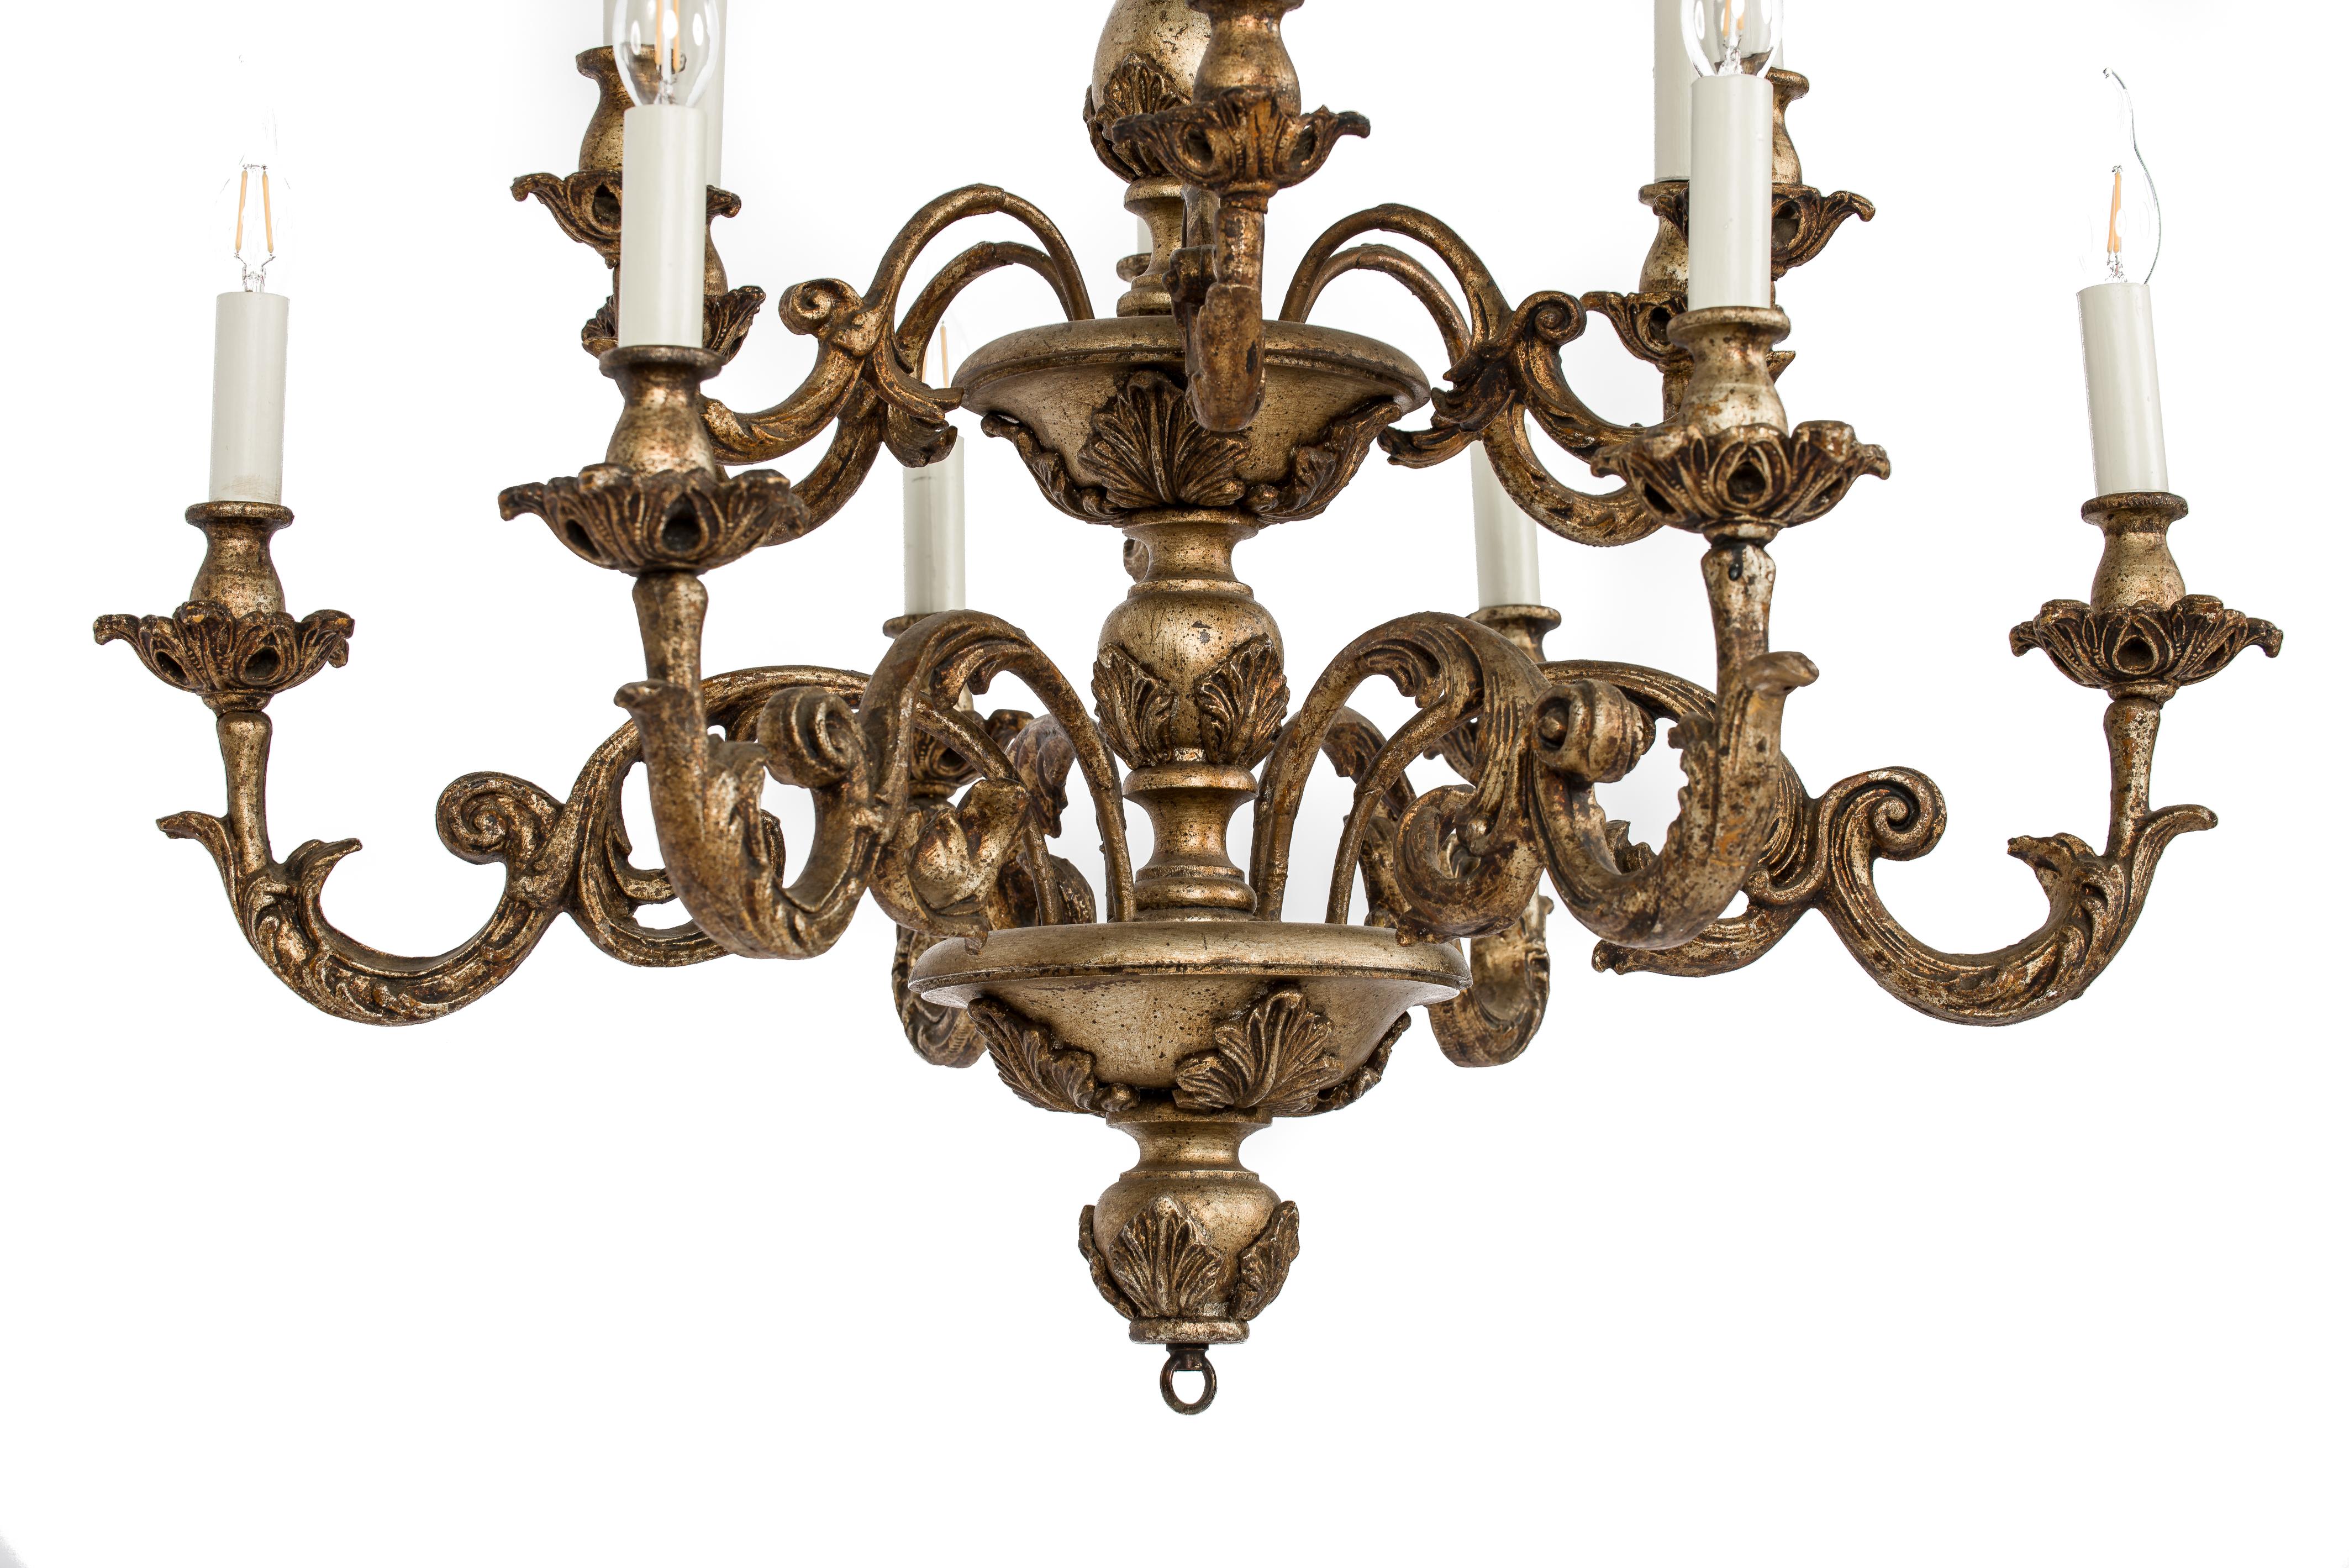 20th Century Italian Baroque Giltwood Two-Tier 12-Arm Florentine Chandelier For Sale 1